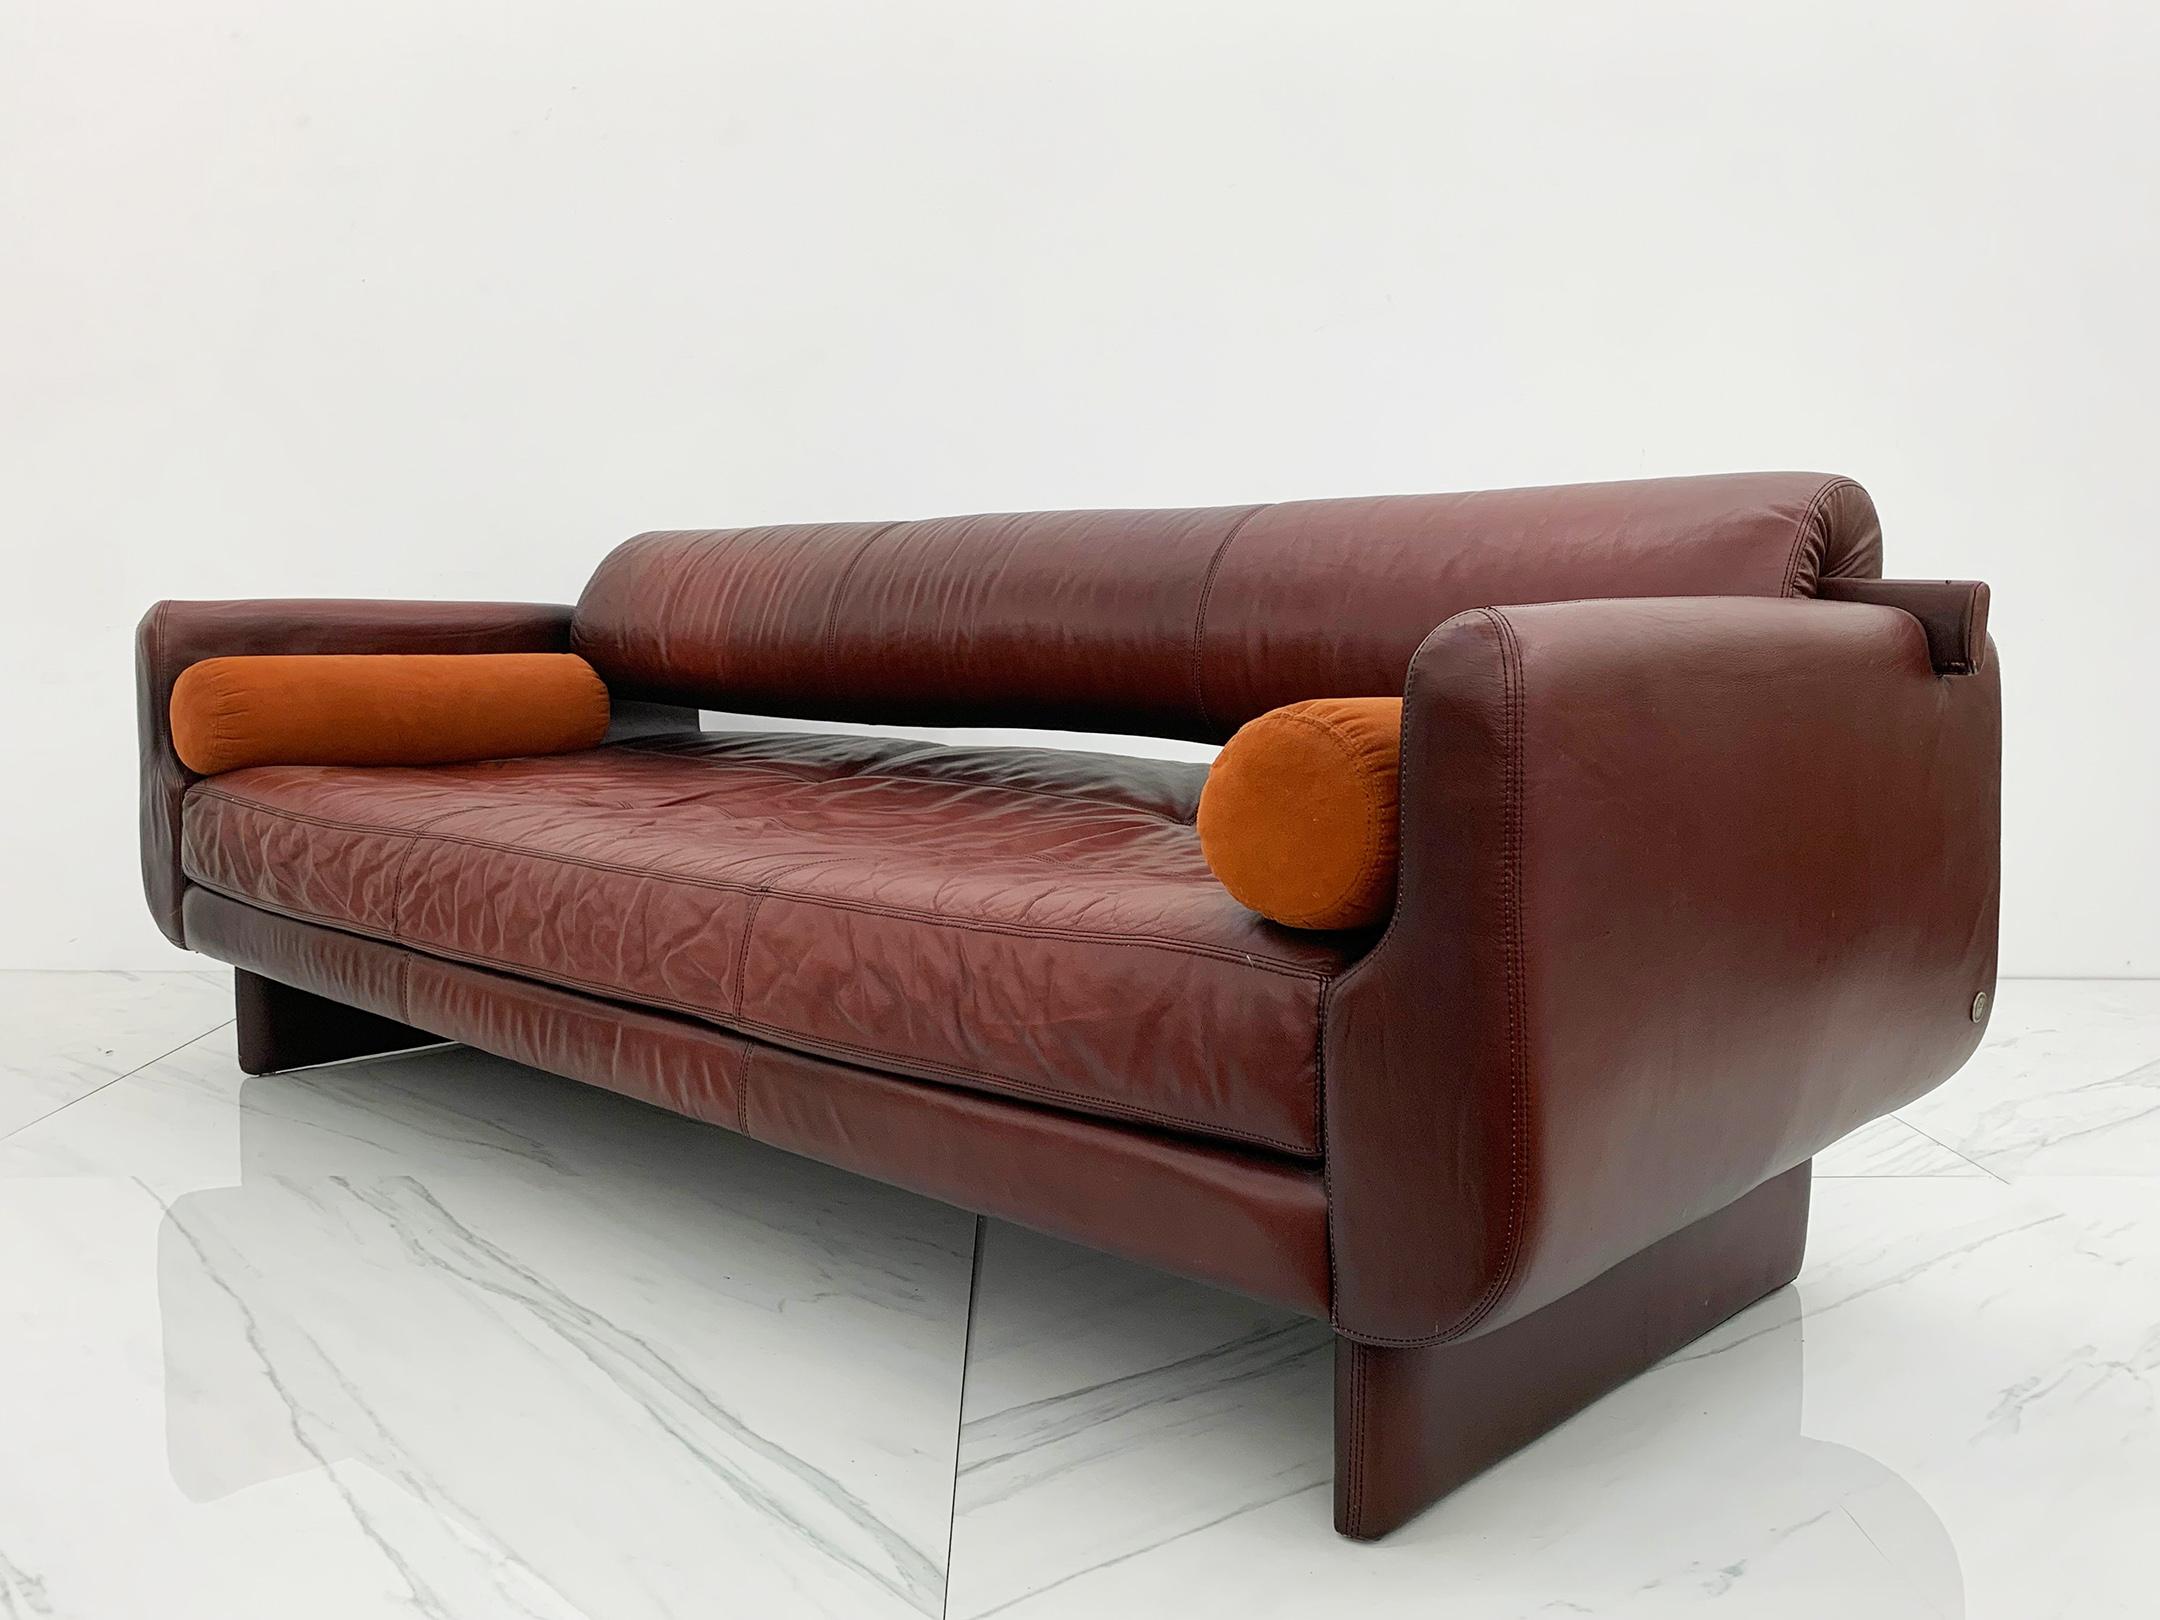 Post-Modern Vladimir Kagan for American Leather Matinee Sofa / Daybed